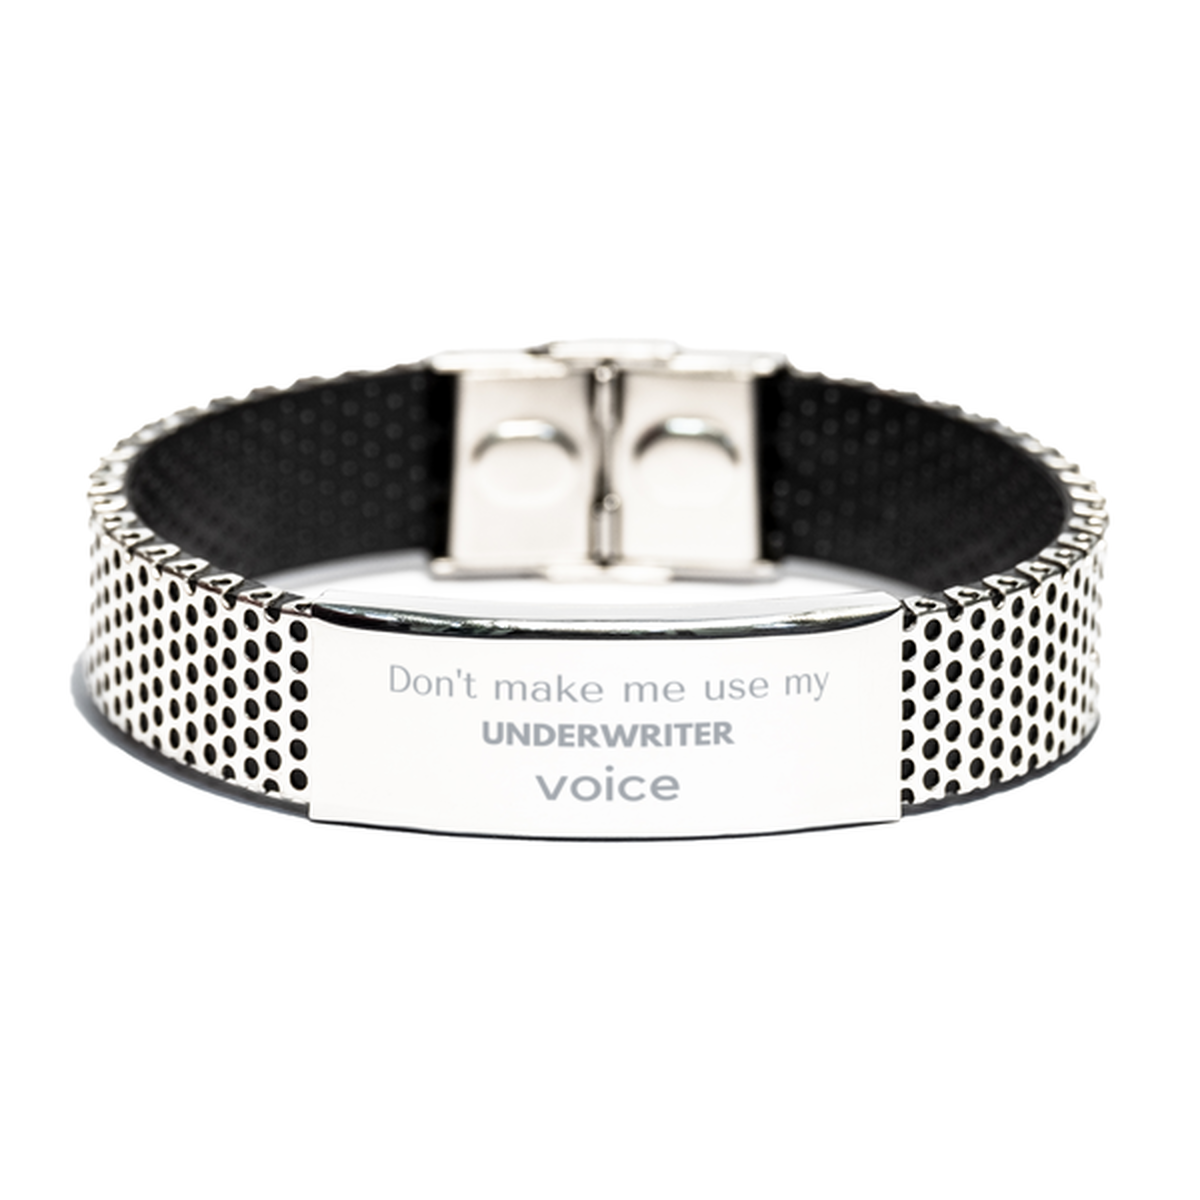 Don't make me use my Underwriter voice, Sarcasm Underwriter Gifts, Christmas Underwriter Stainless Steel Bracelet Birthday Unique Gifts For Underwriter Coworkers, Men, Women, Colleague, Friends